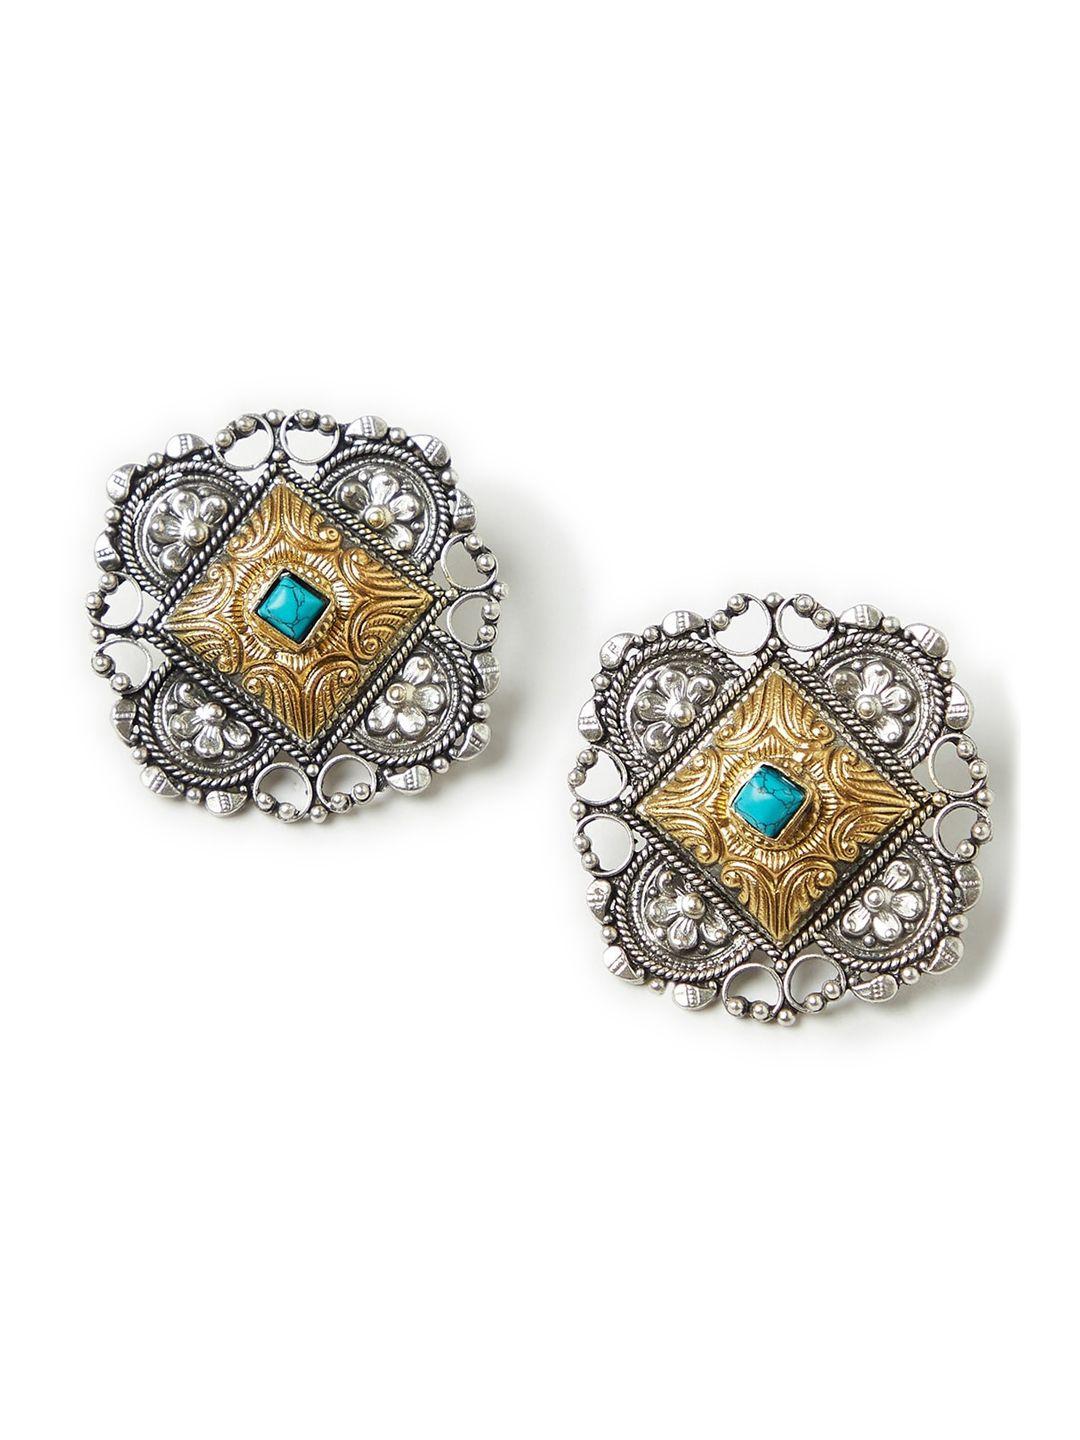 fabindia gold-toned silver-plated sterling silver handcrafted oversized stud earrings